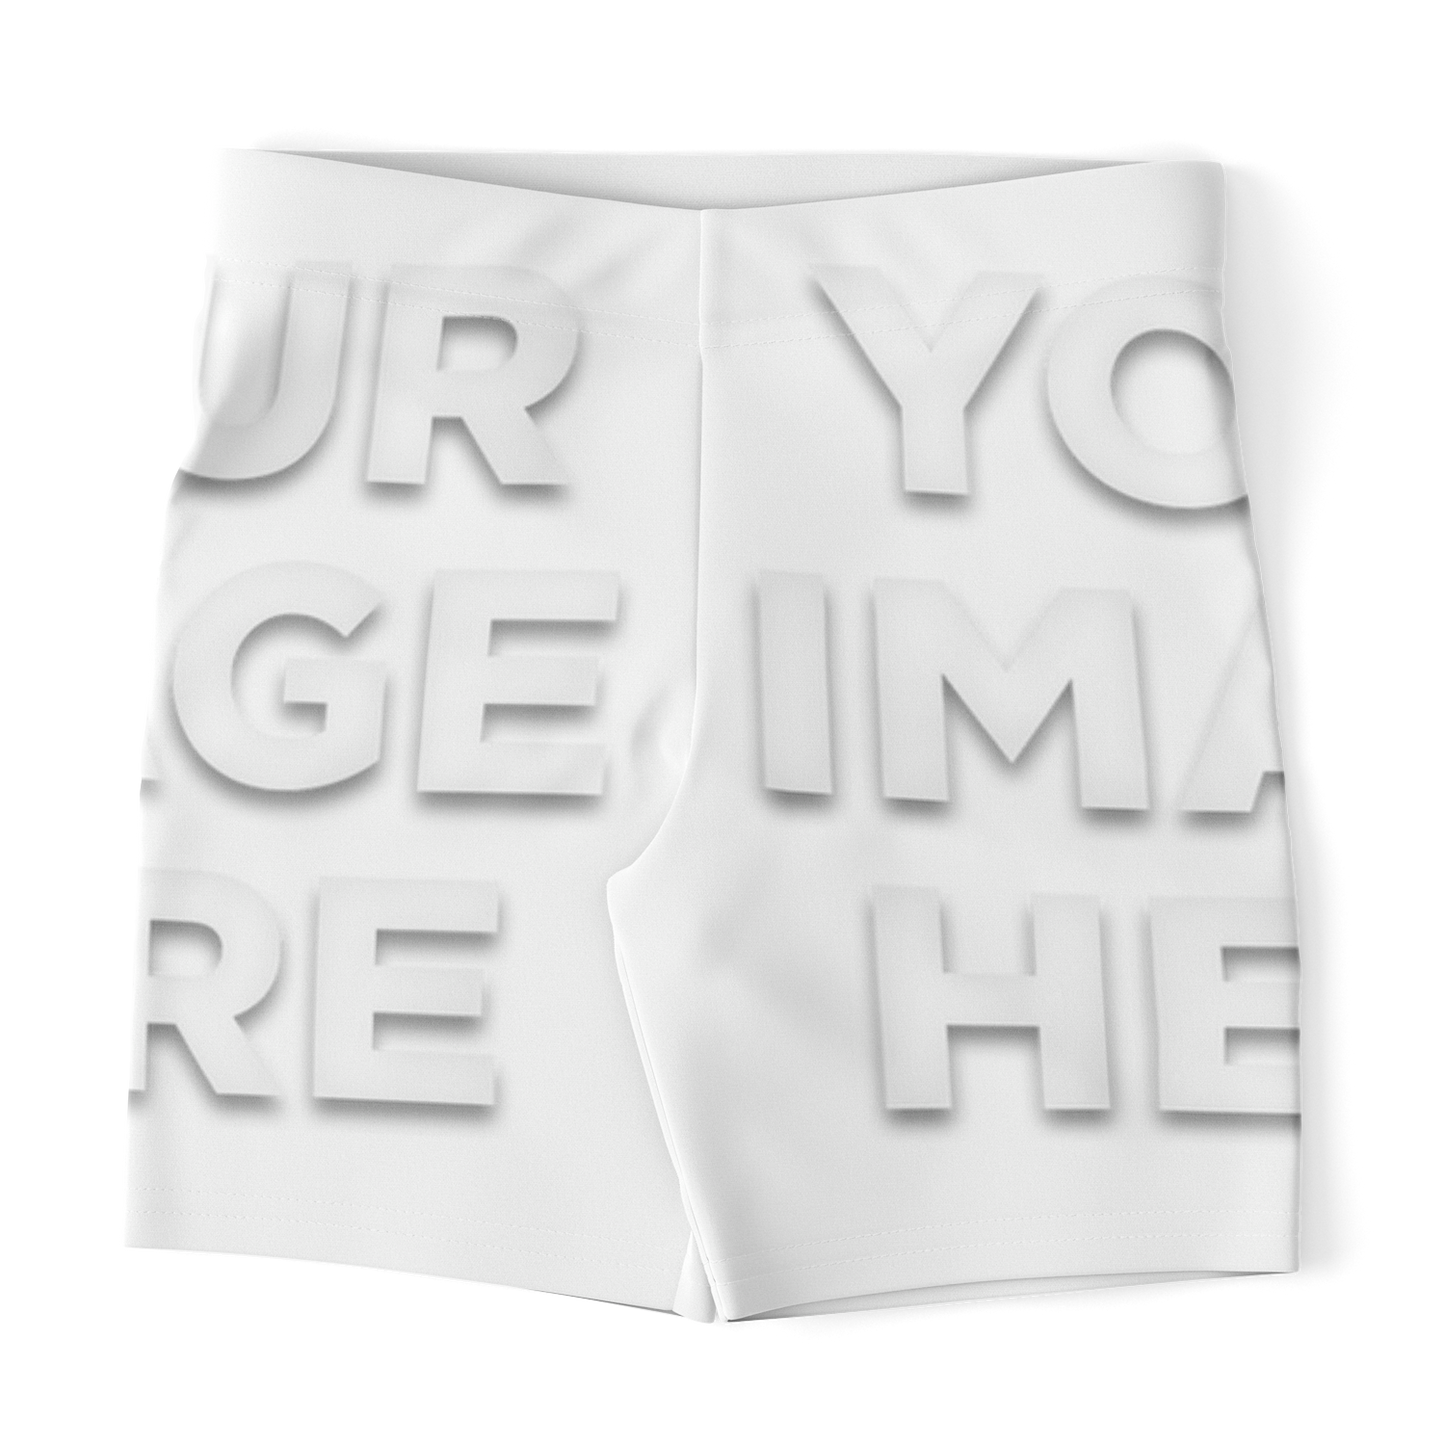 CANVAS LEGGINGS SHORTS - BUILD YOUR OWN YGM